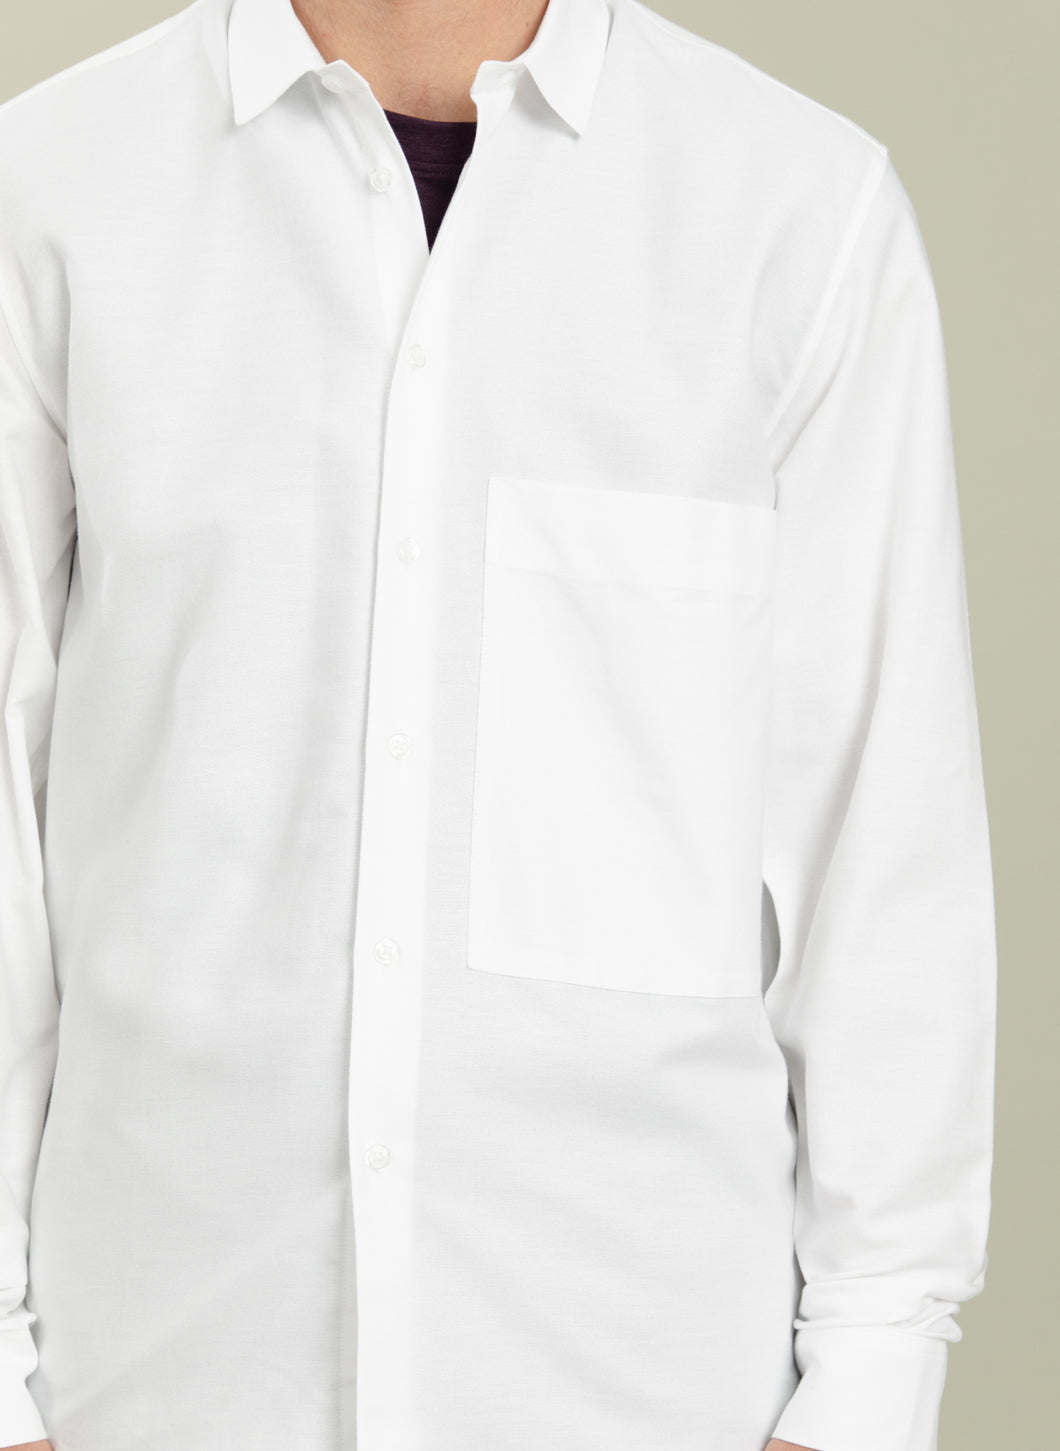 Shirt with Large Patch Pocket in White Oxford